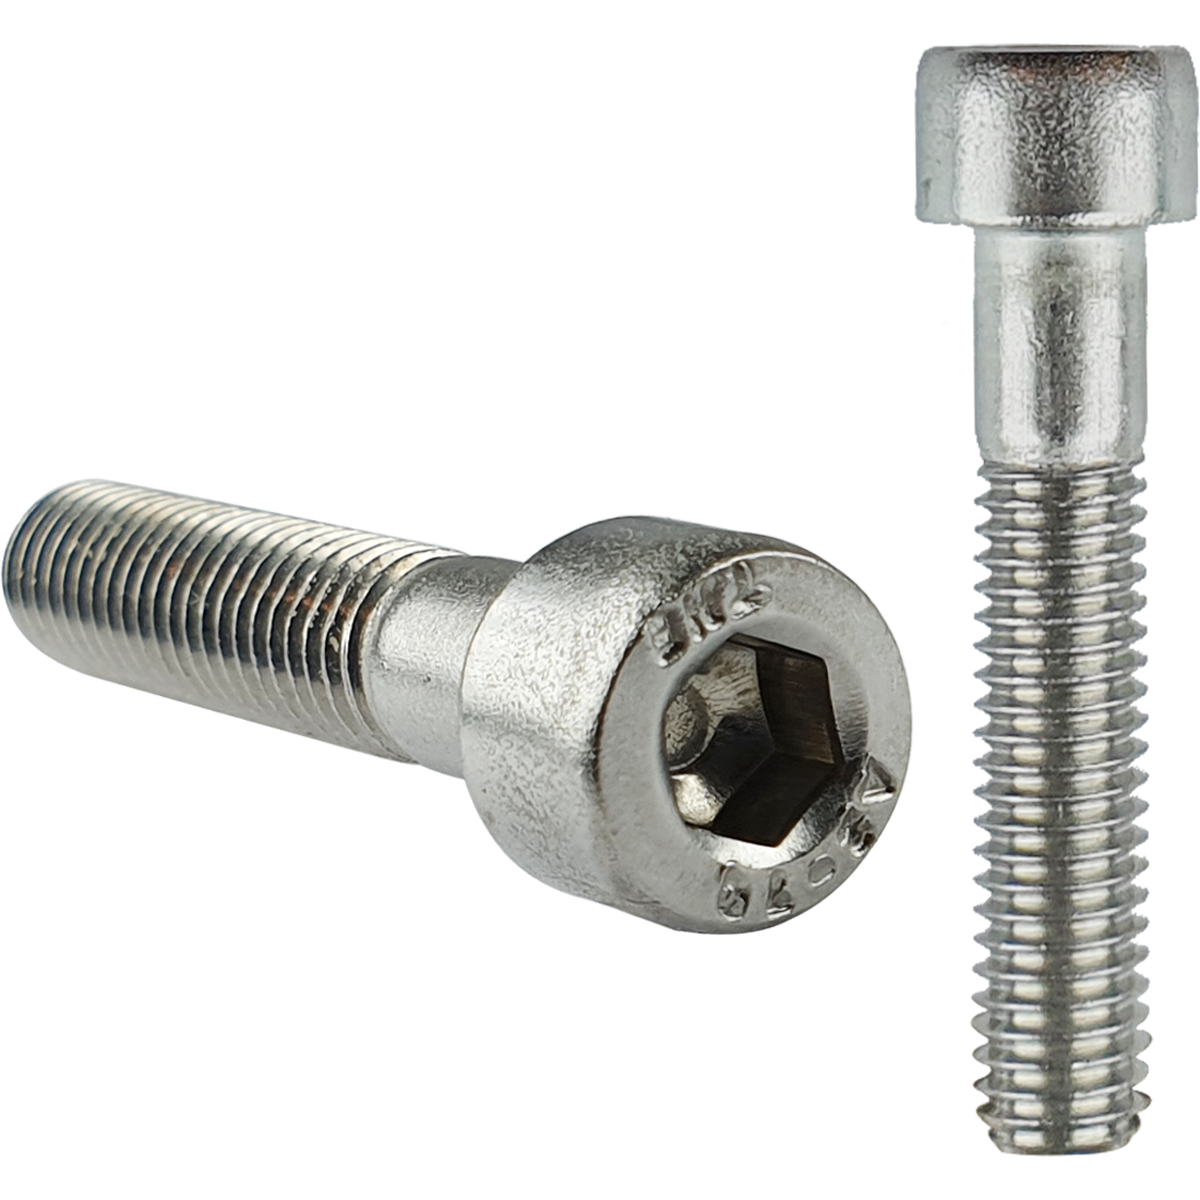 A screw with a deep cap head with a hex recess. A wide range of cap head screws, also known as socket screws, are available in a variety of diameters, lengths, and materials